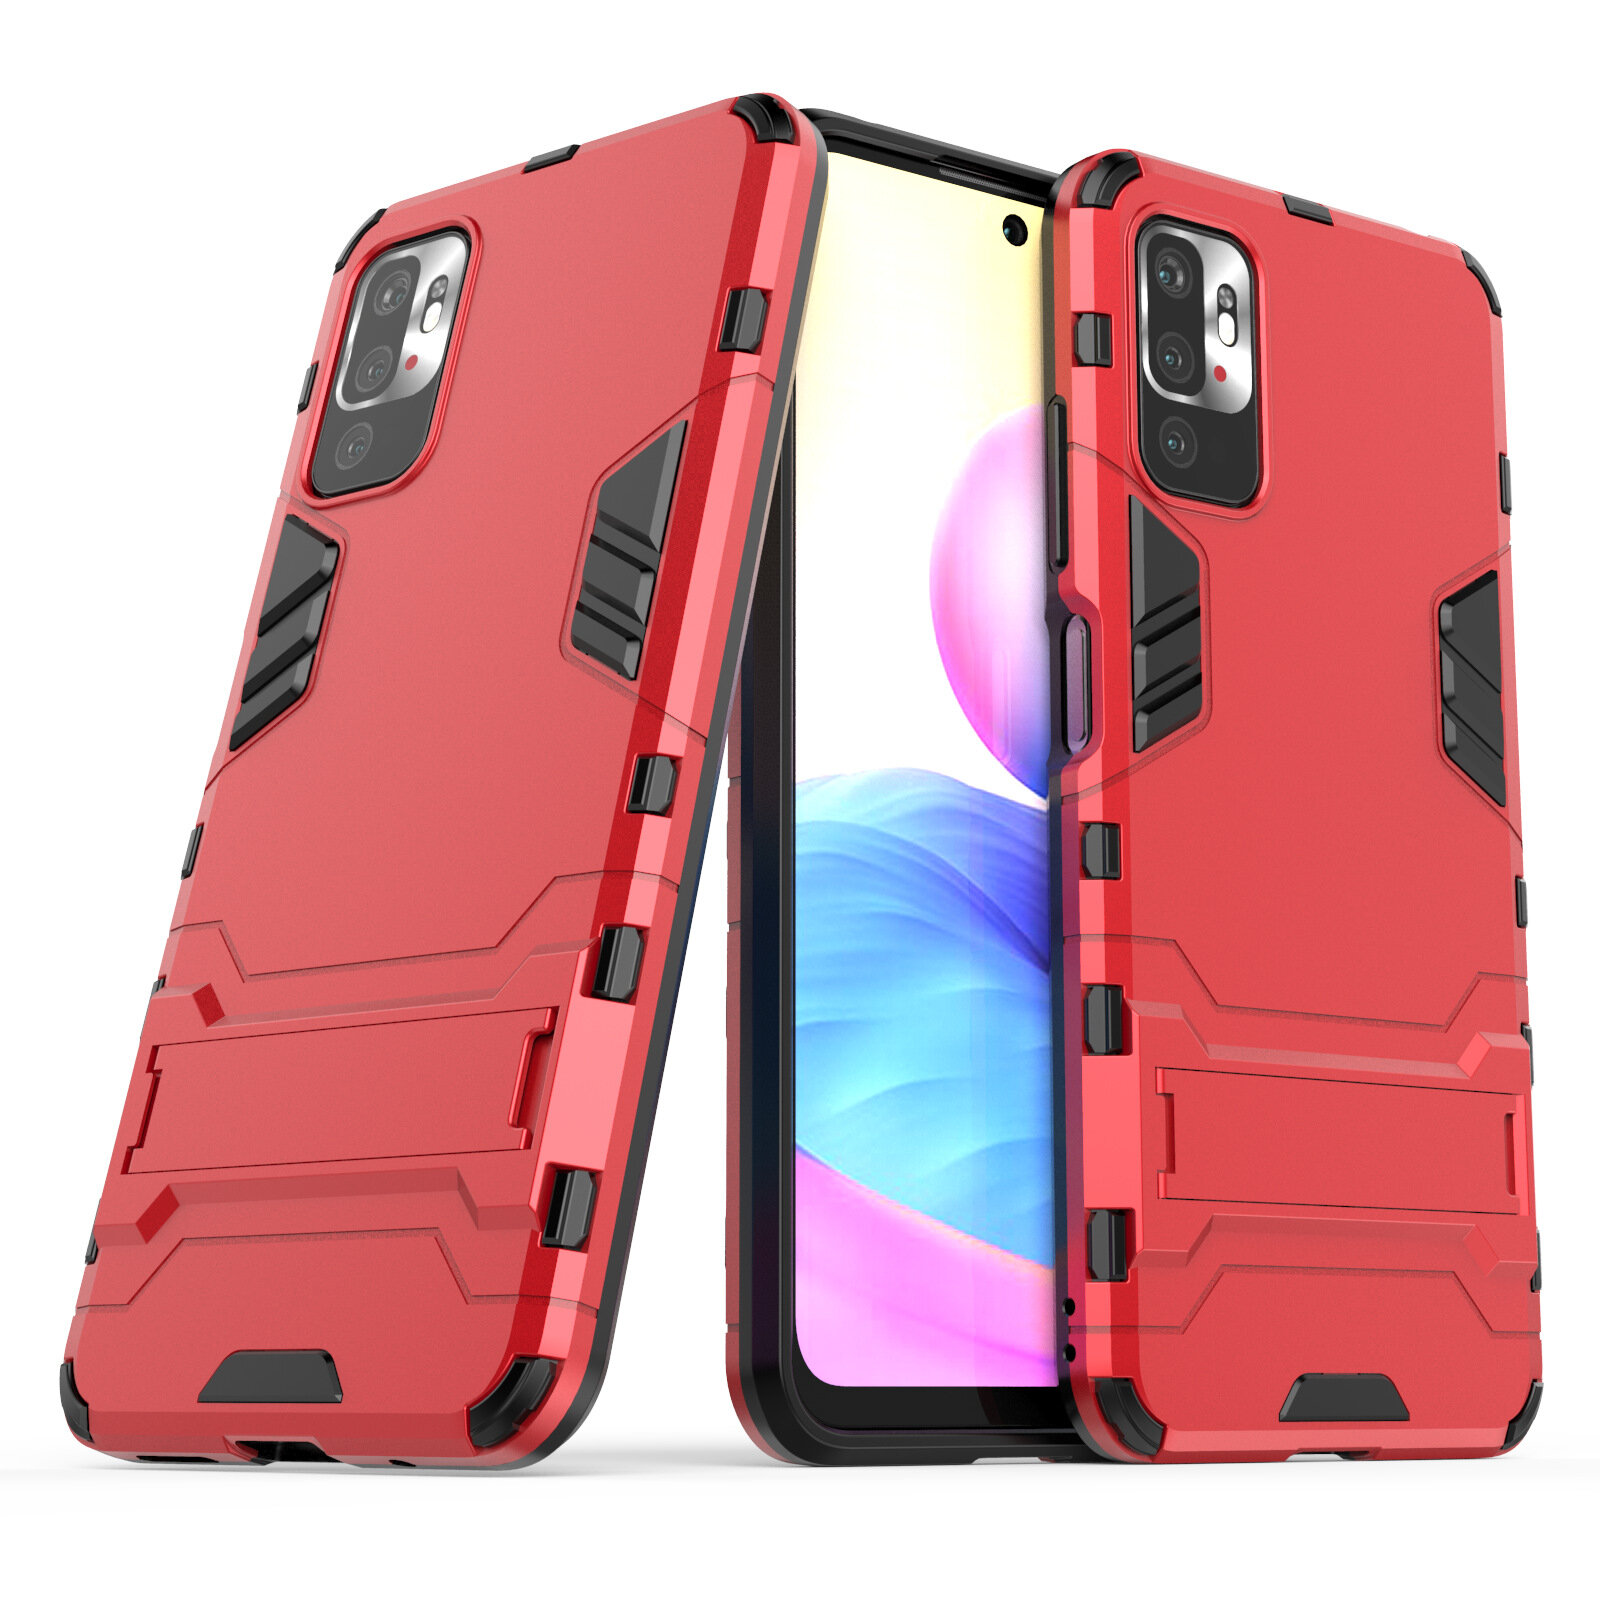 Bakeey for POCO M3 Pro 5G NFC Global Version/ Xiaomi Redmi Note 10 5G Case Armor with Bracket Shockproof PC Protective Case Back Cover COD